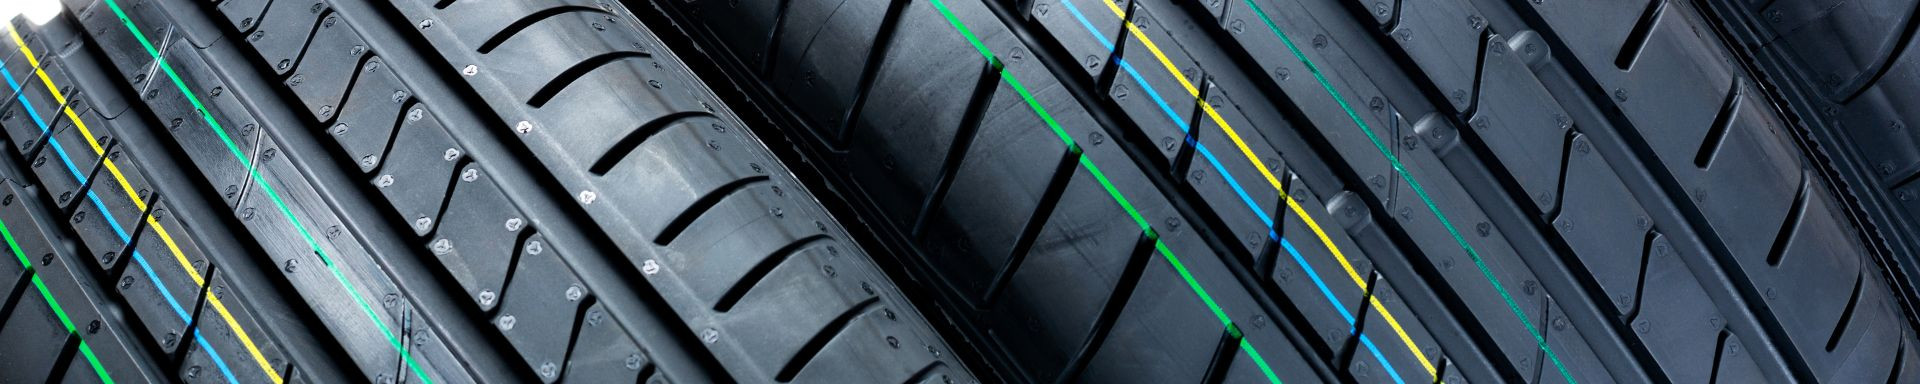 Image displaying a variety of new tires available at Holm’s Mechanical LTD., showcasing our selection and expertise in tire sales and installation services.